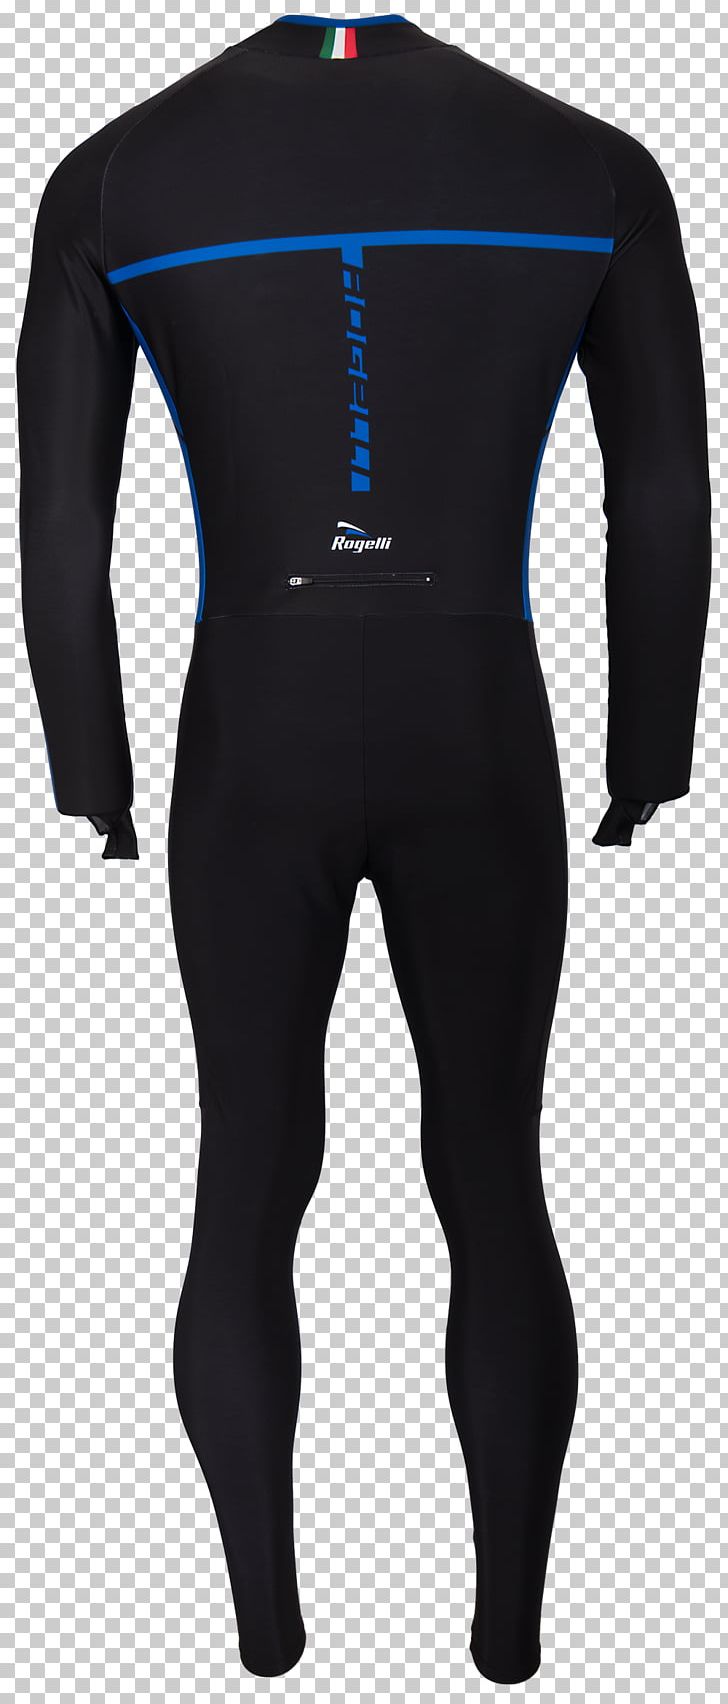 Wetsuit Clothing Accessories Boyshorts Shoe PNG, Clipart, Barefoot, Boyshorts, Clothing, Clothing Accessories, Electric Blue Free PNG Download